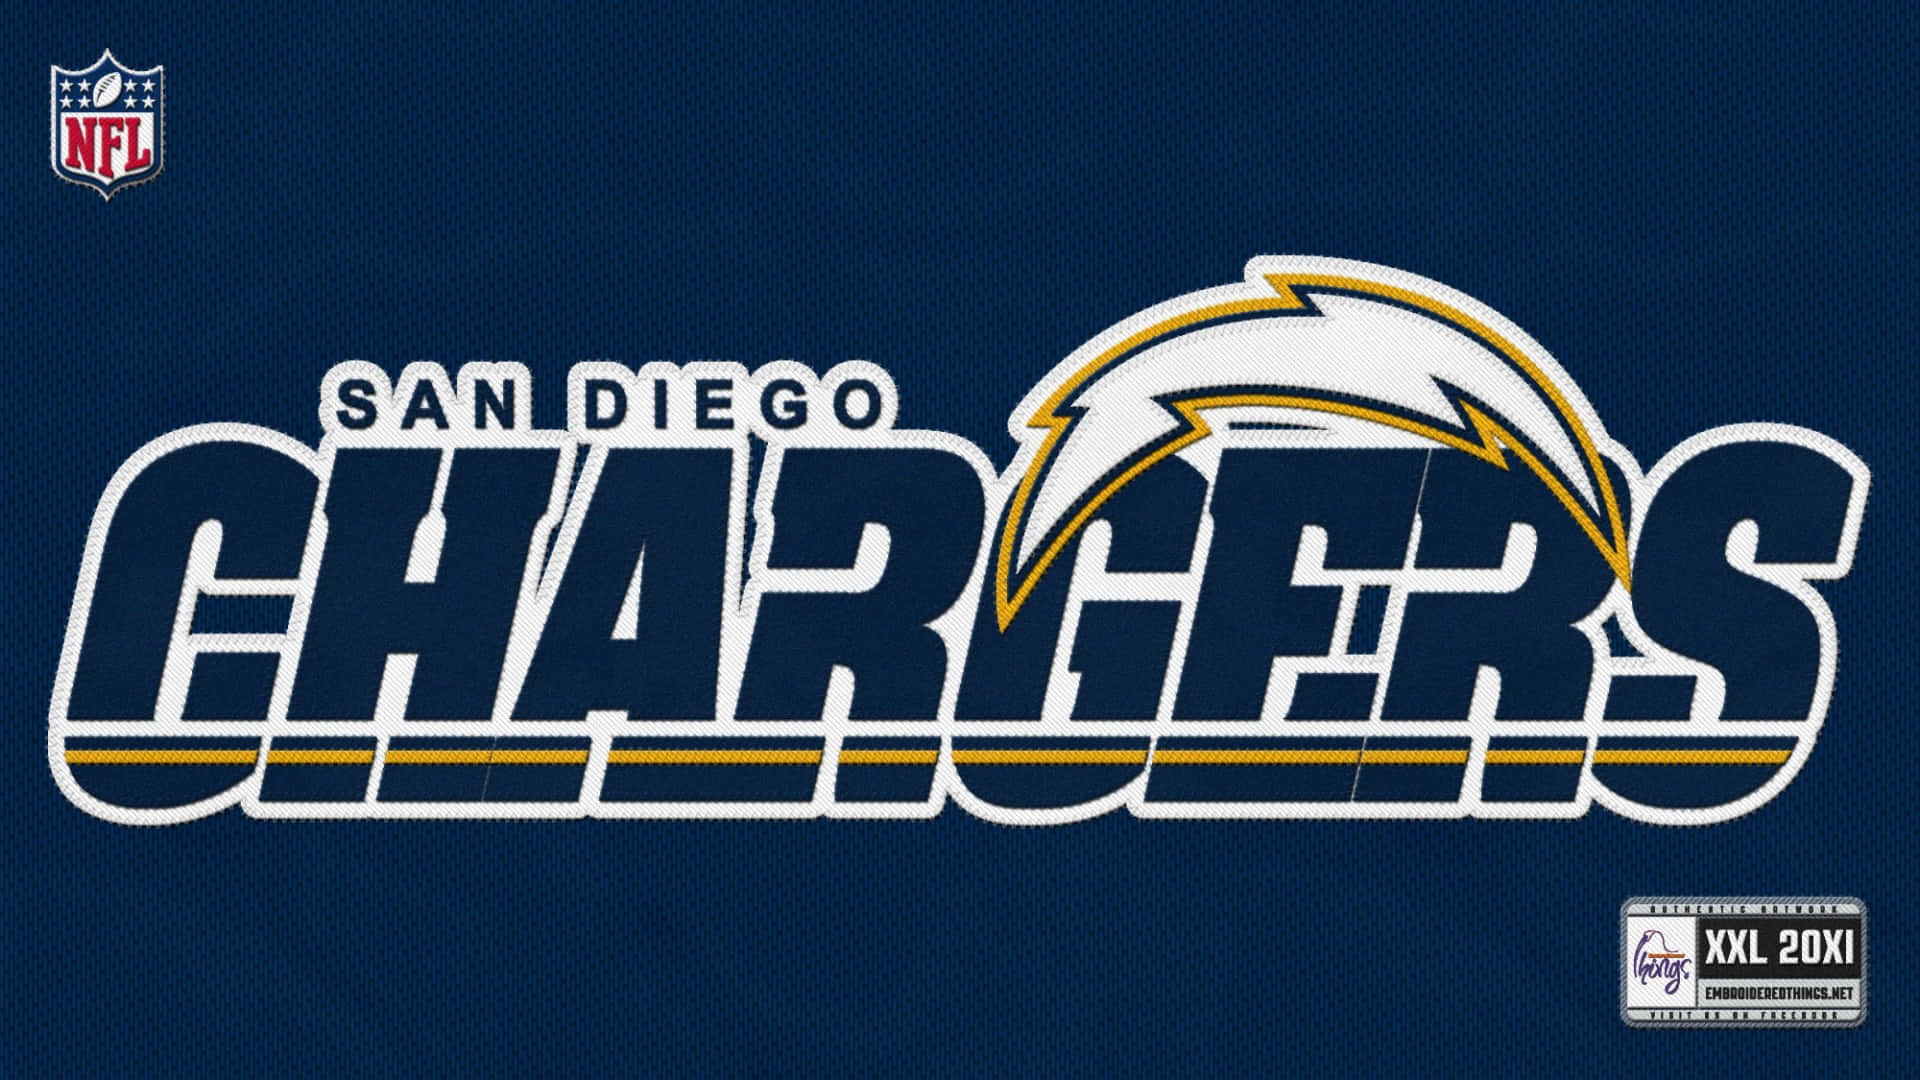 Get up, get loud, and go Chargers! Wallpaper